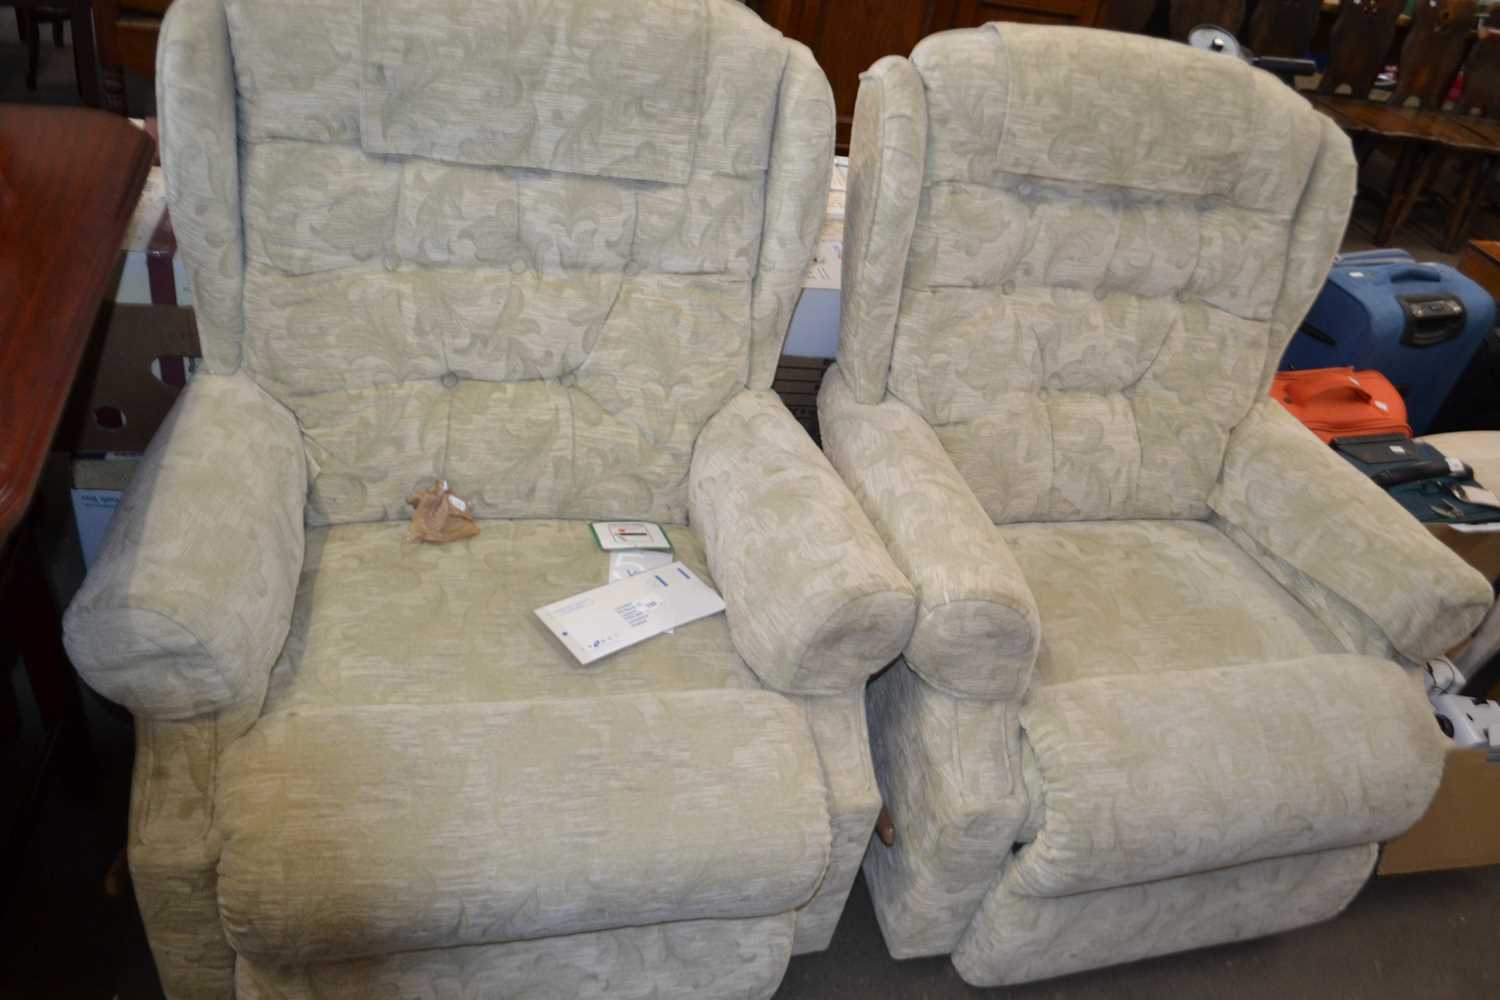 Two Lazboy armchairs in green upholstery